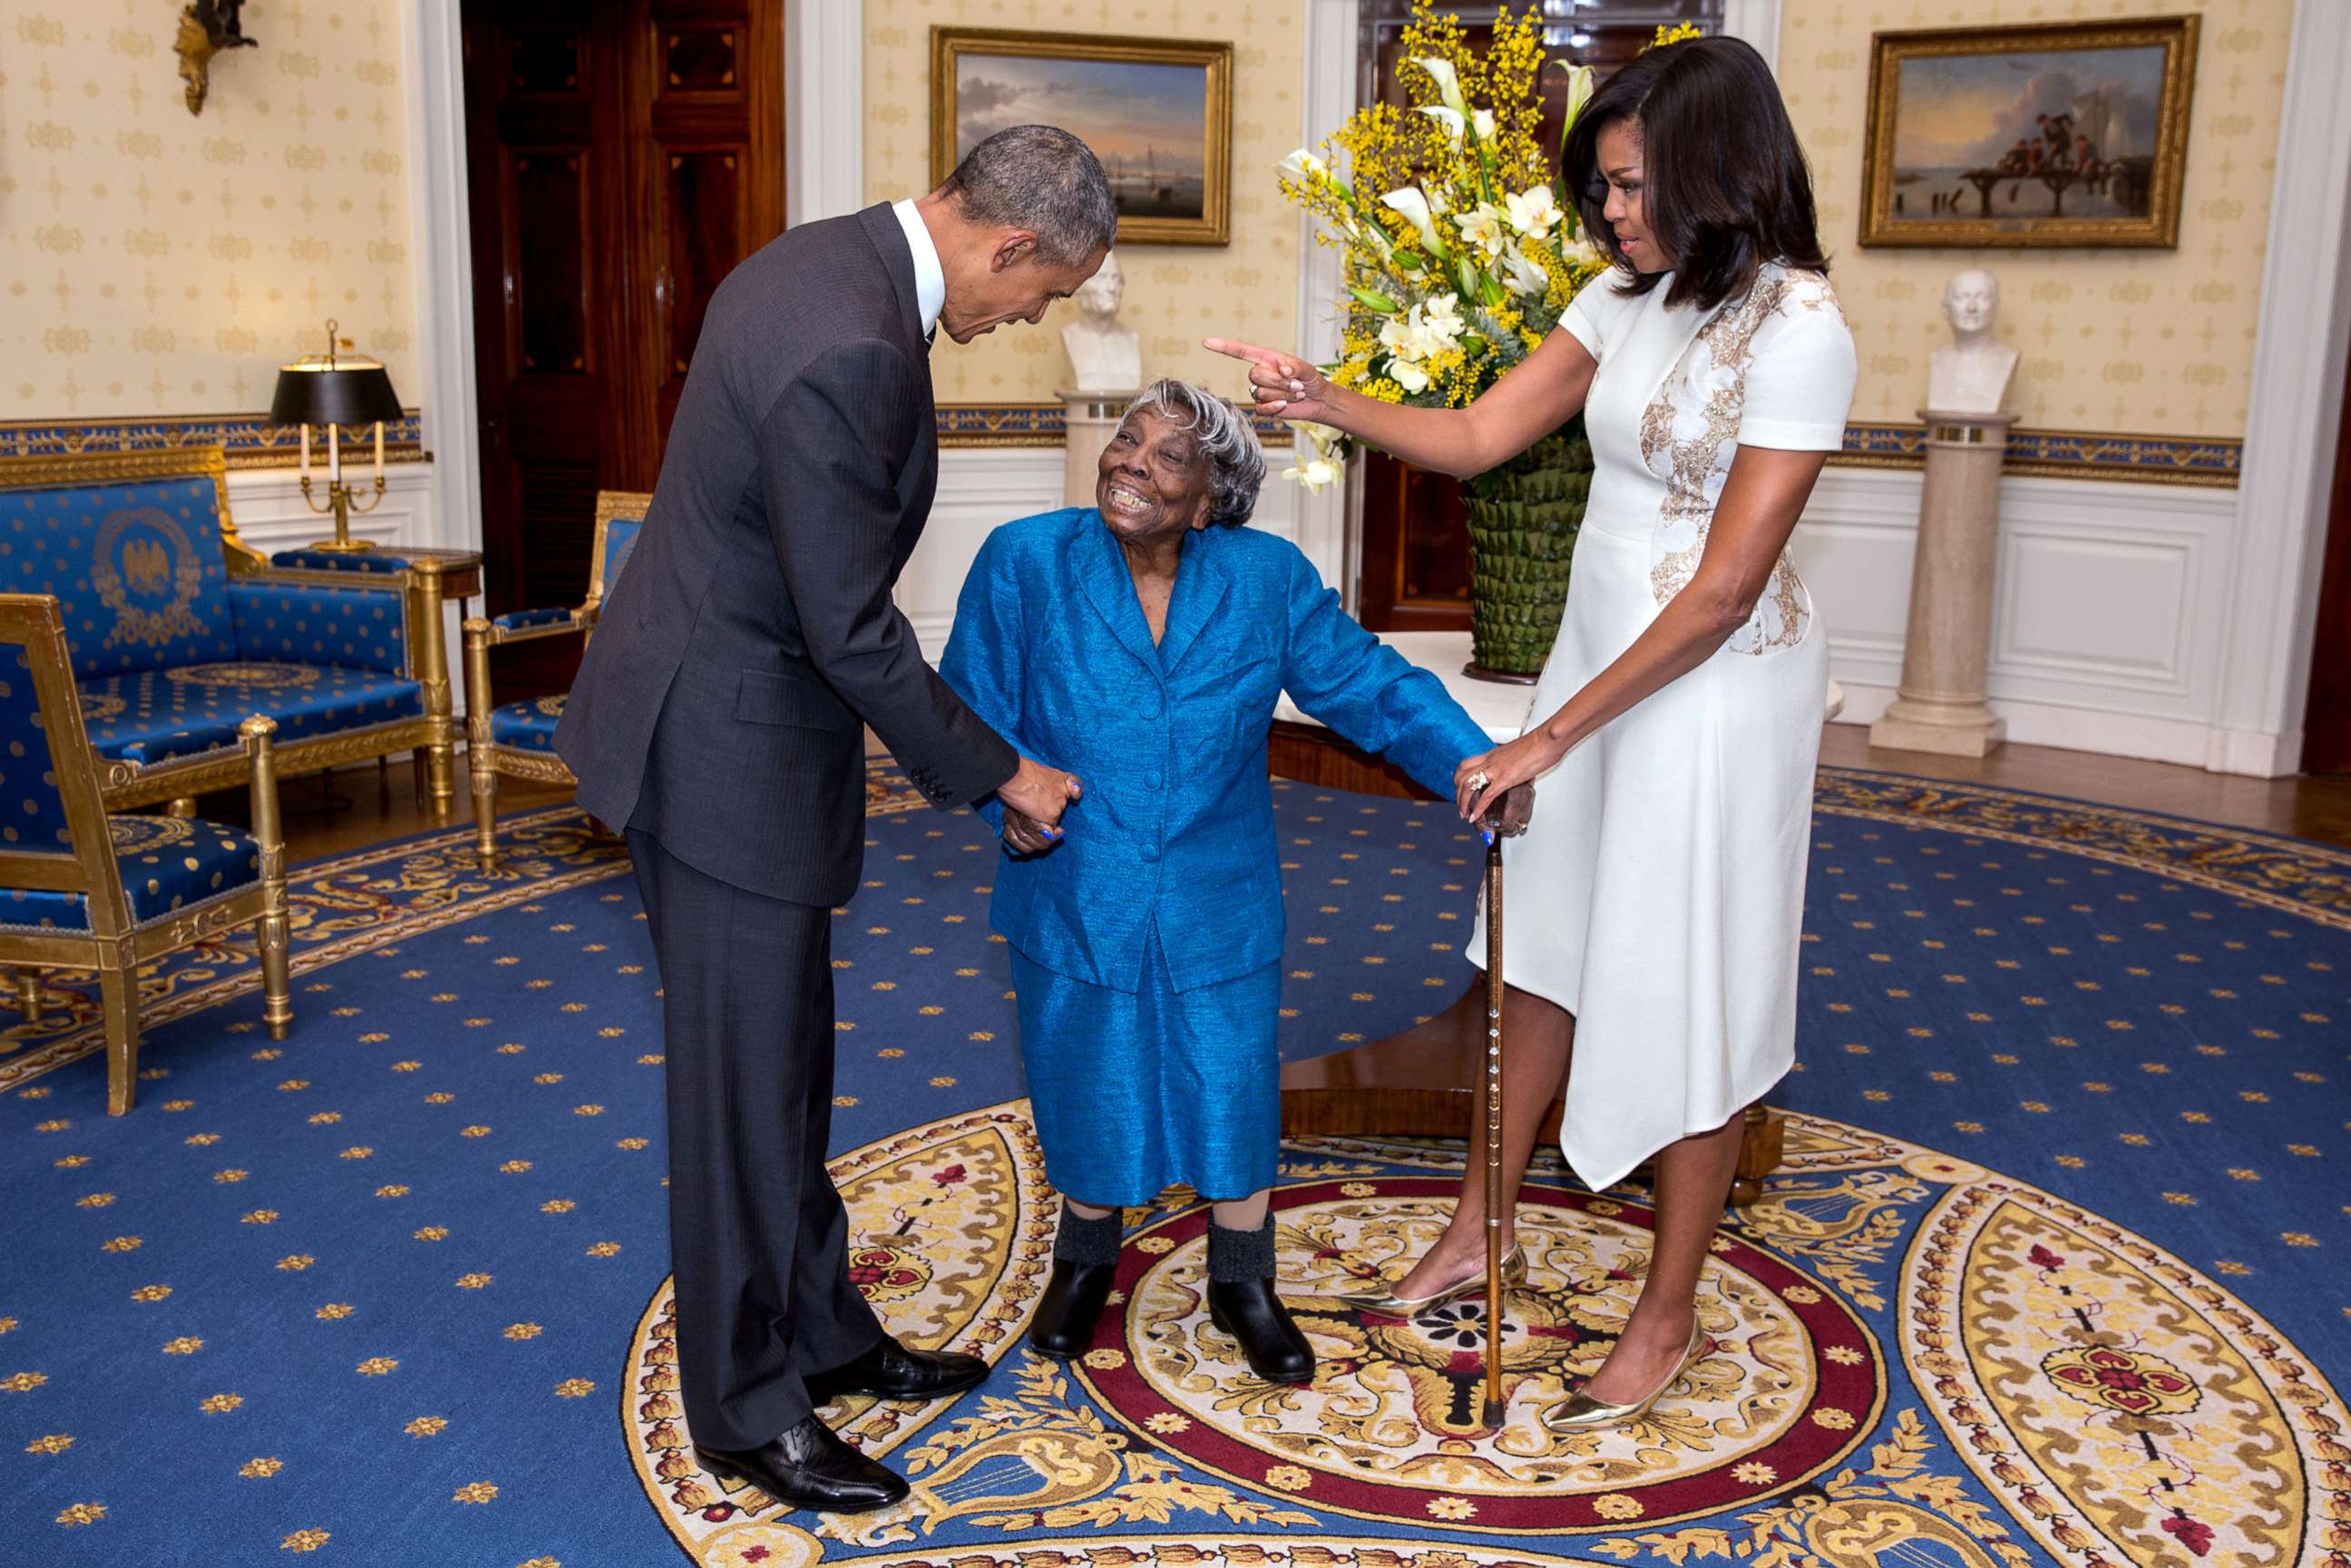 PHOTO: President Barack Obama and First Lady Michelle Obama greet Virginia McLaurin in the Blue Room of the White House prior to a reception celebrating African American History Month, Feb. 18, 2016.